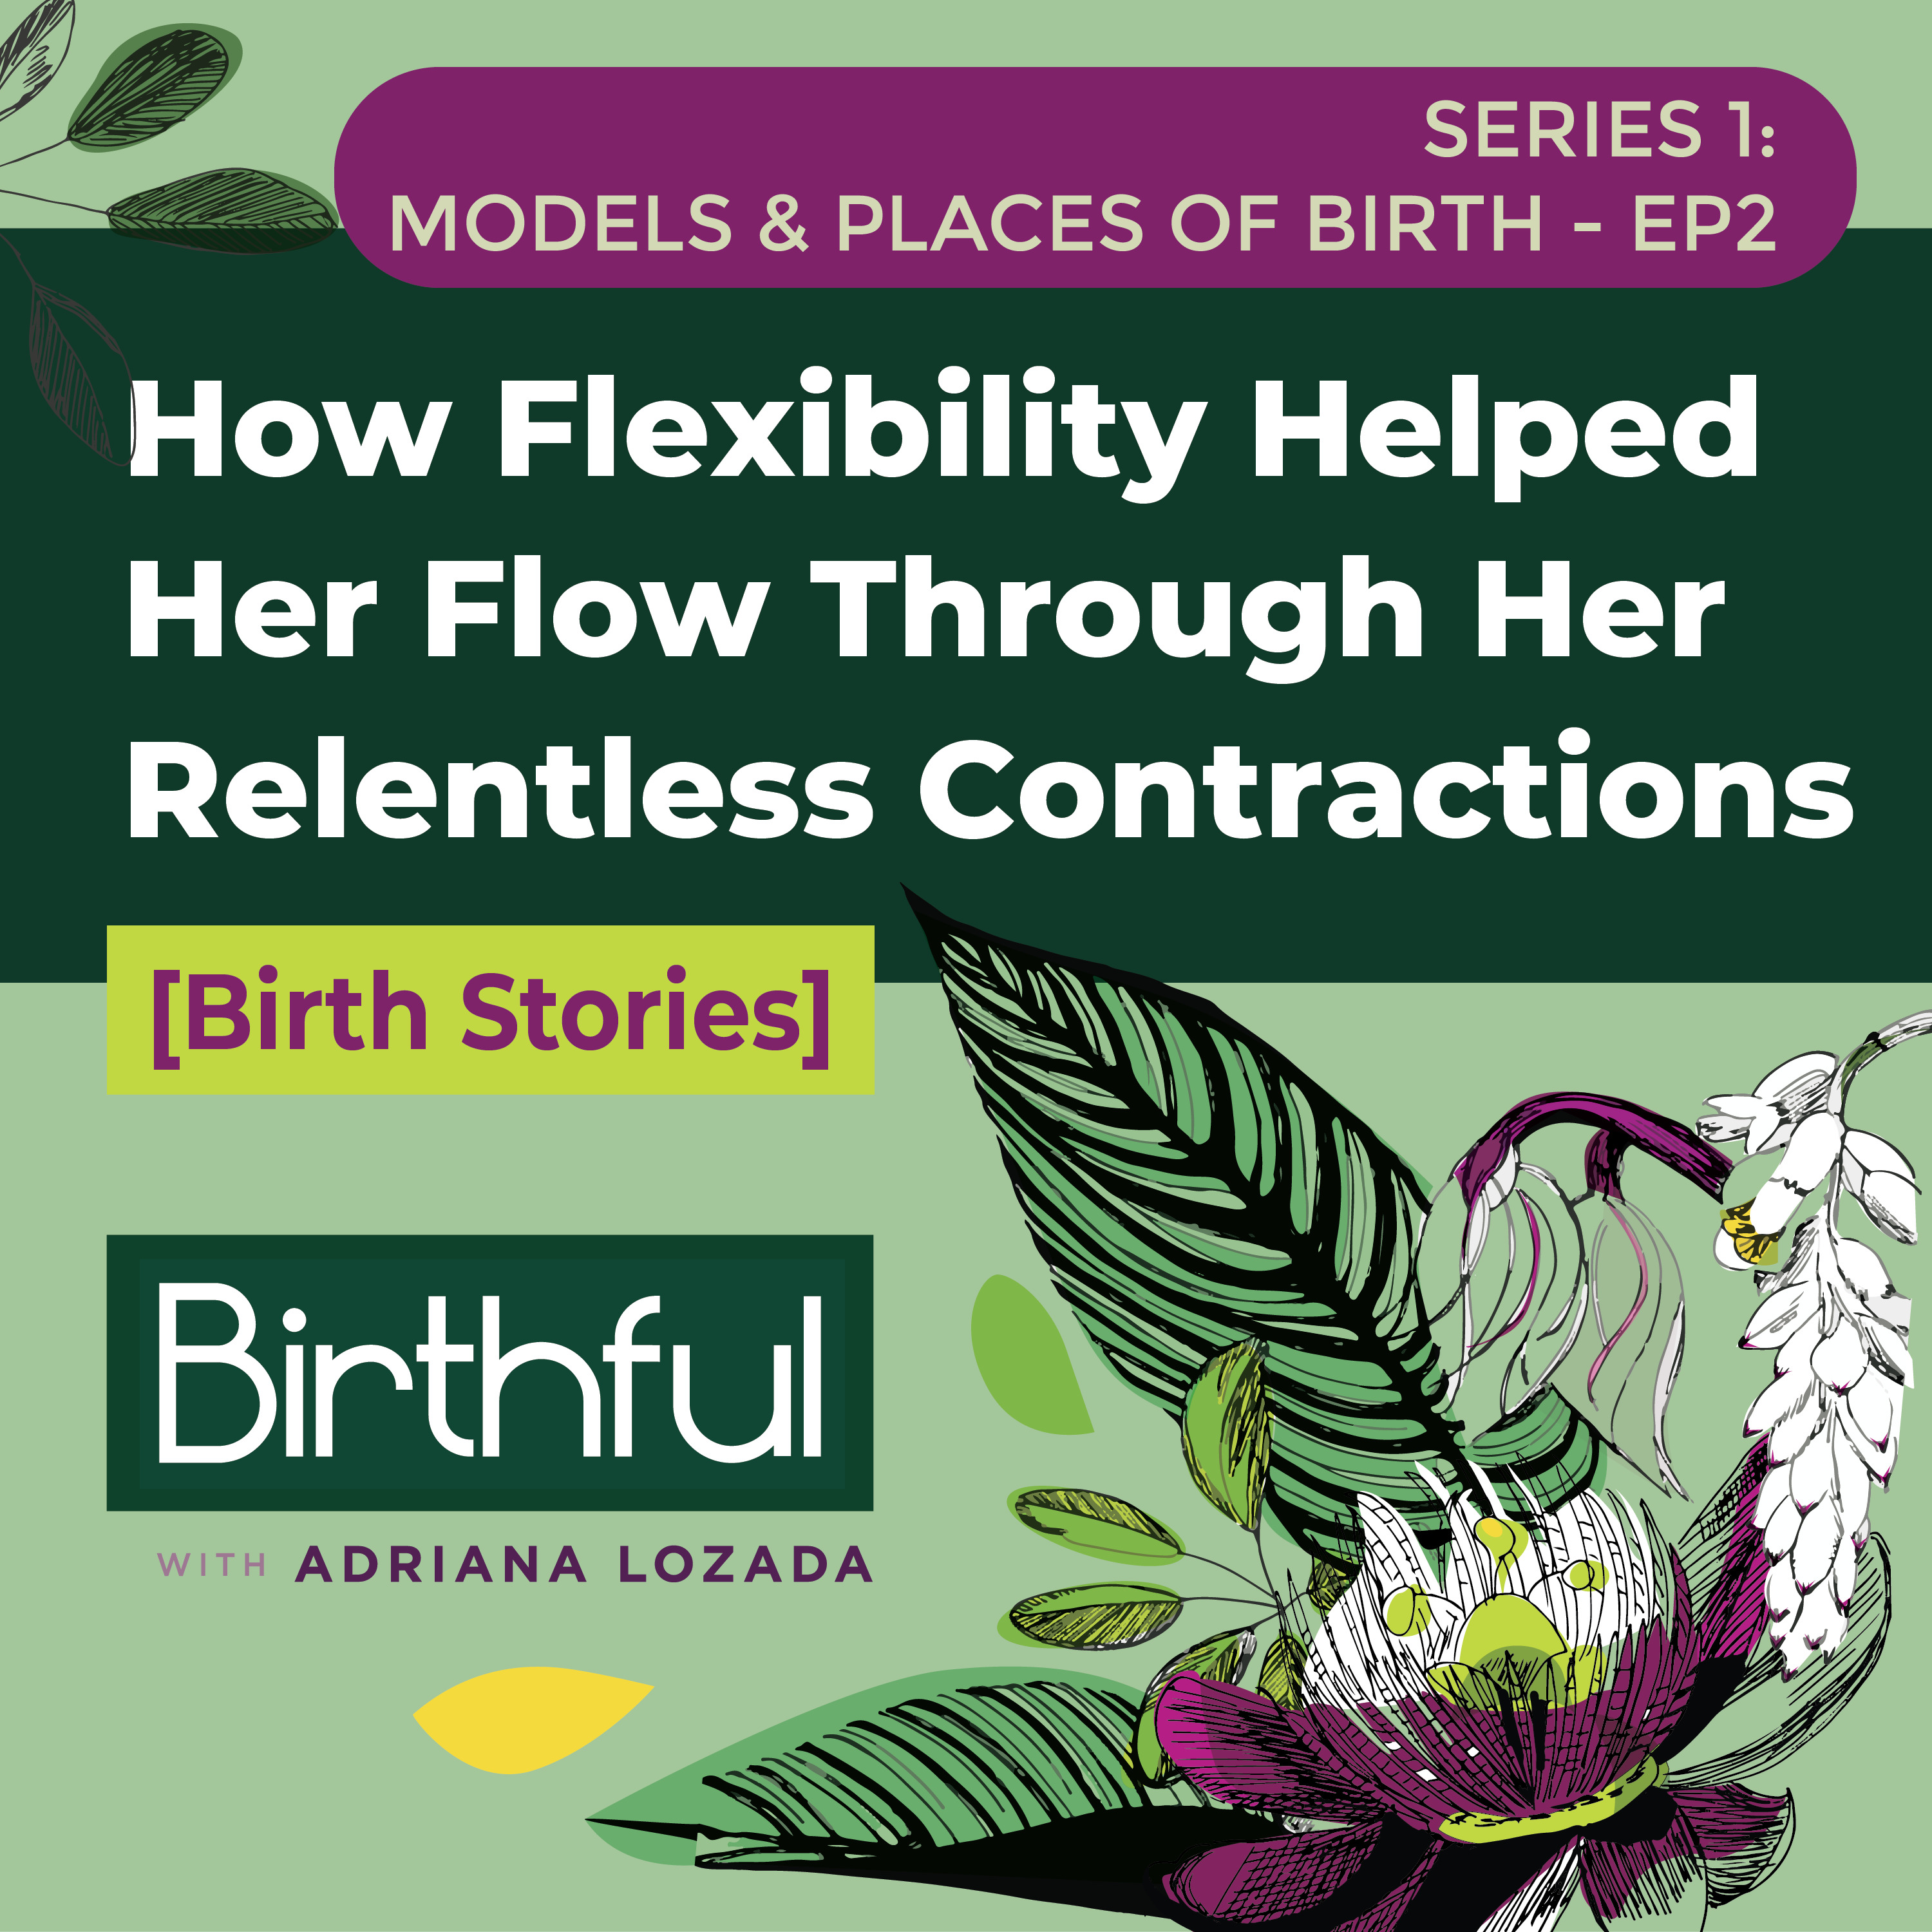 [Birth Stories] How Flexibility Helped Her Flow Through Relentless Contractions